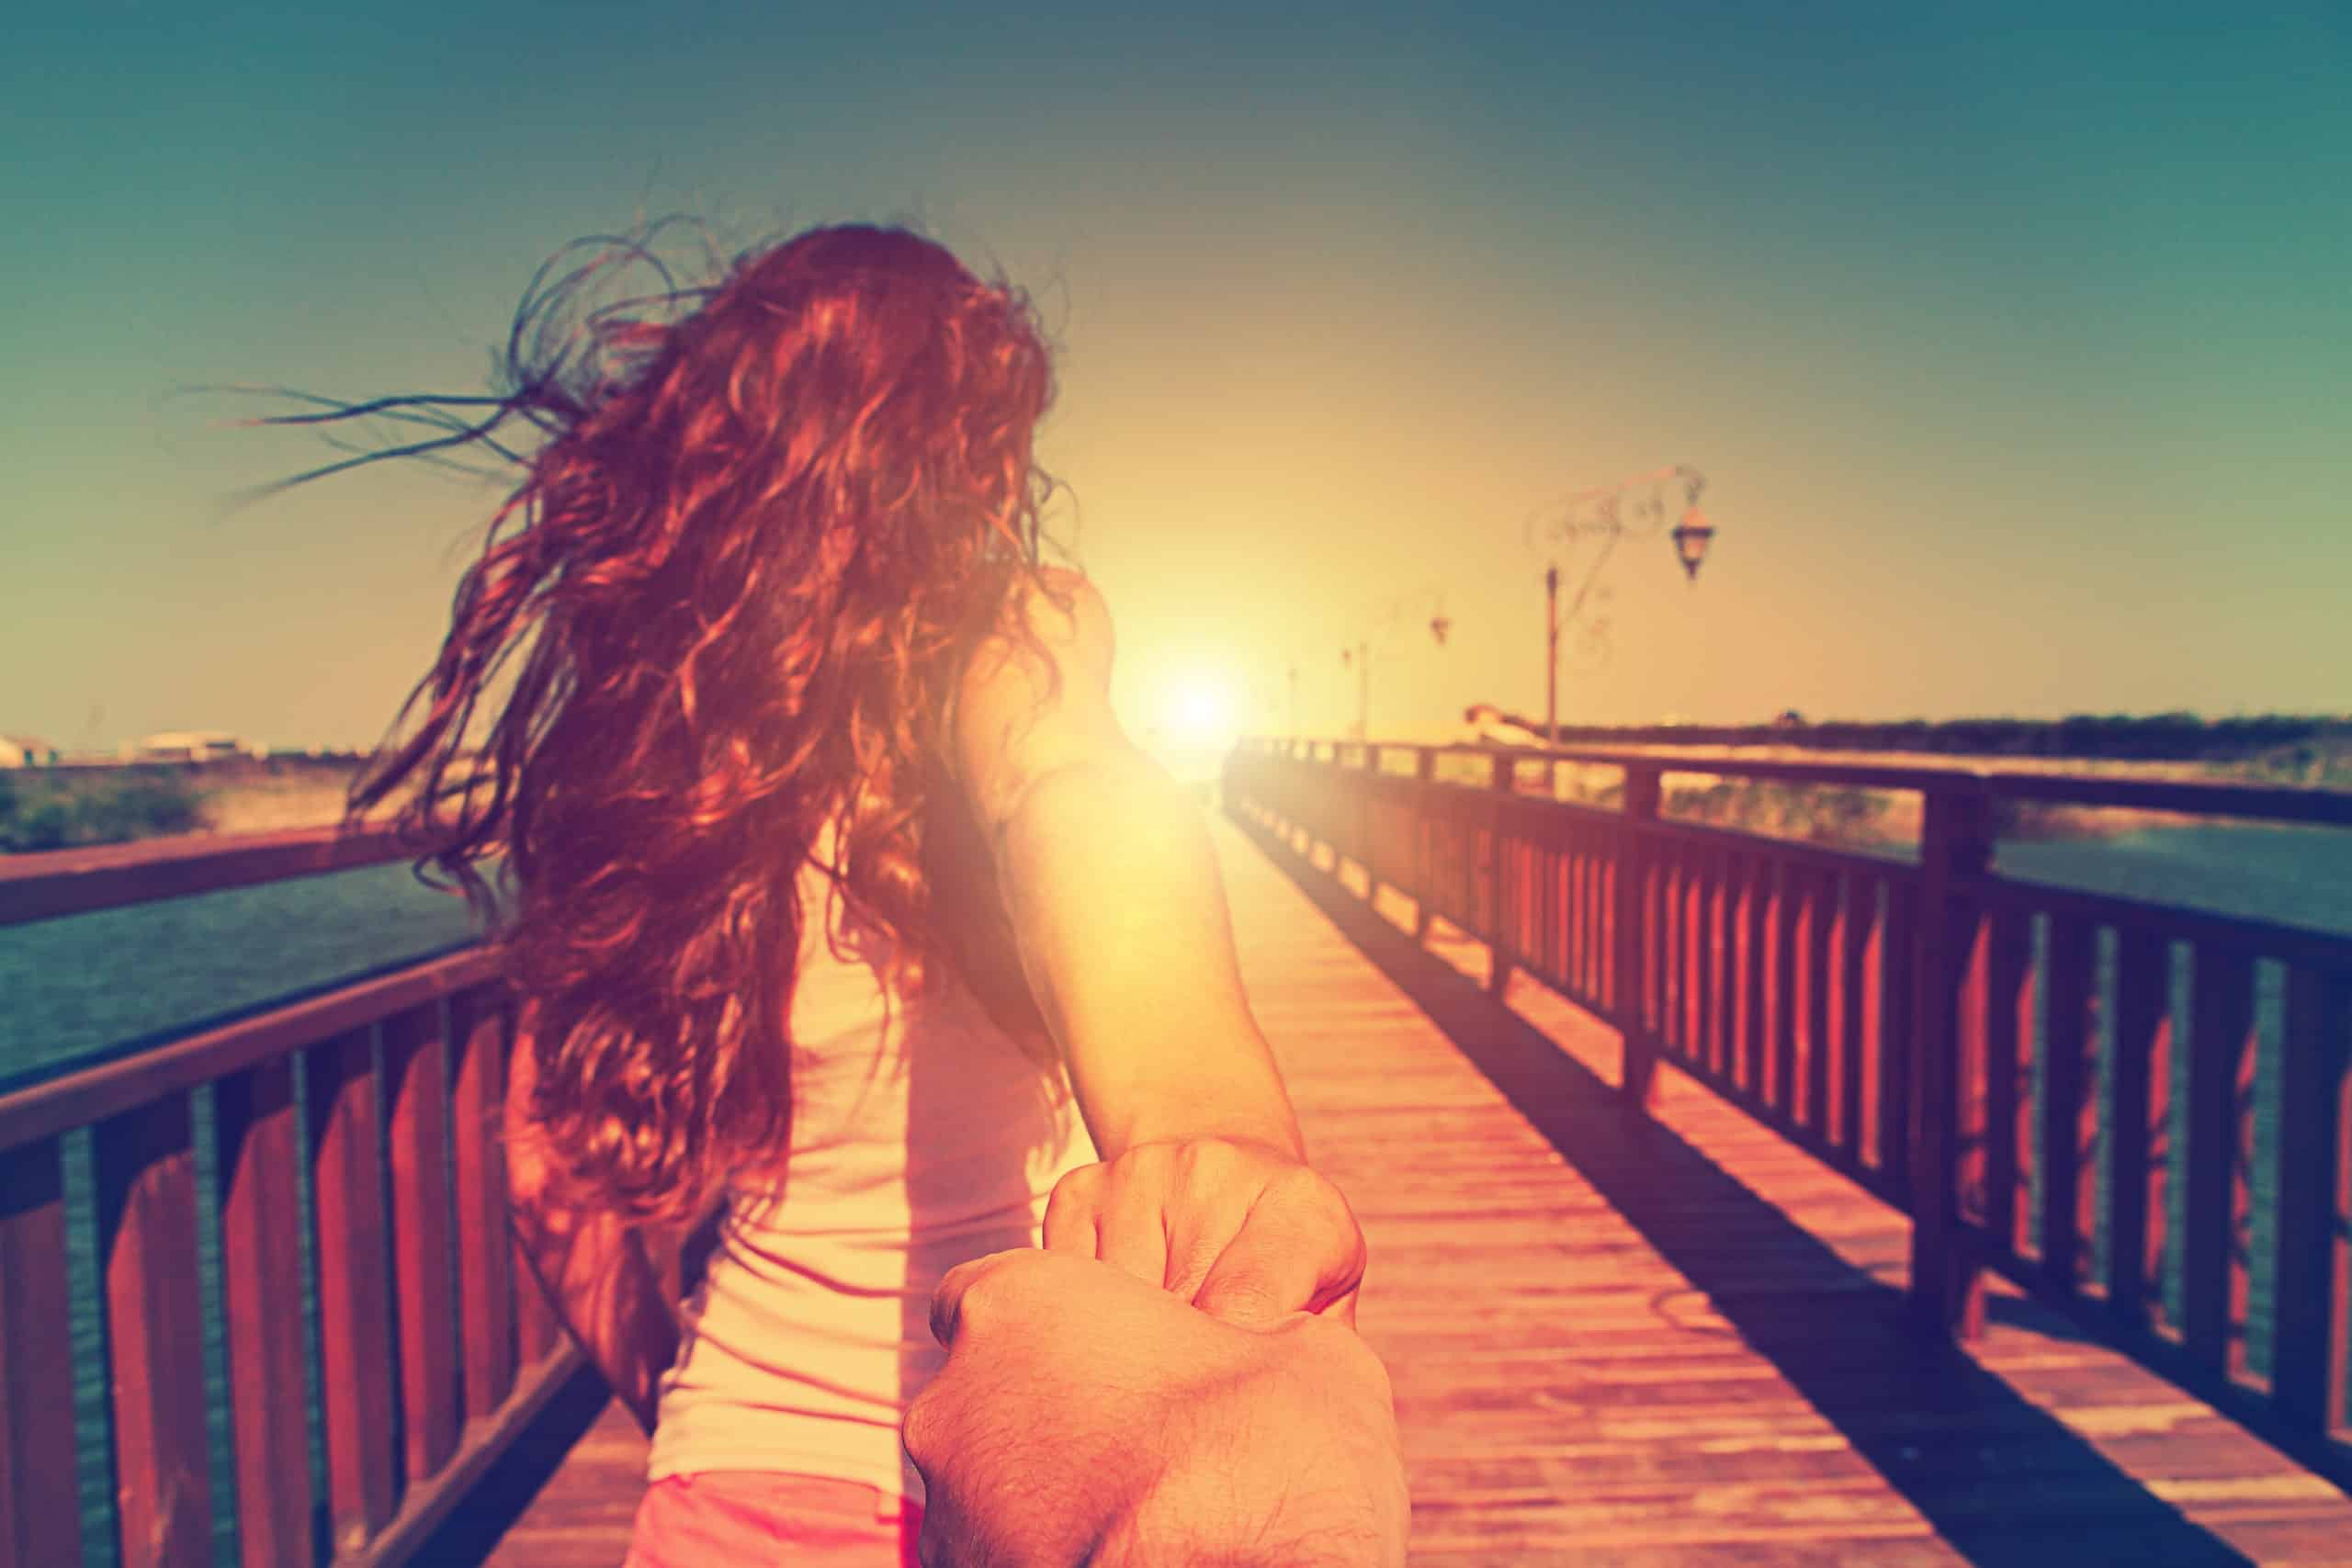 Back view of young girl running toward the sunset on a bridge, holding a man's hand.